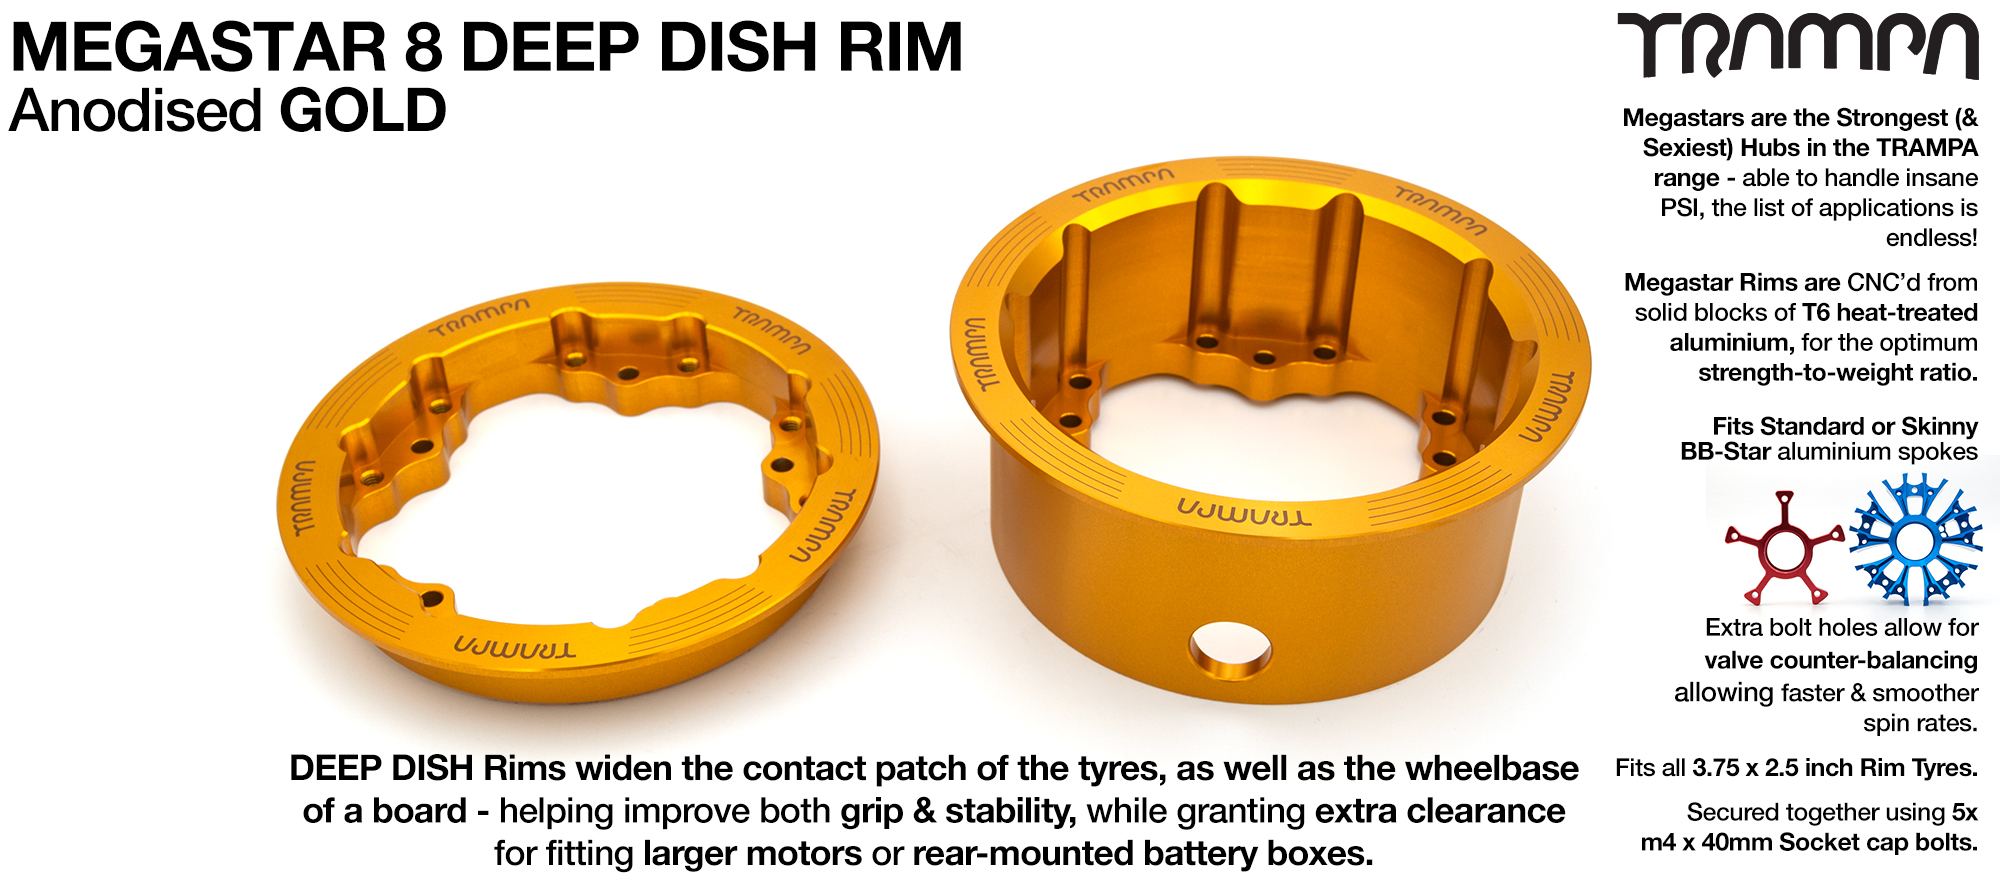 MEGASTAR 8 DEEP-DISH Rims Measure 3.75 x 2.5 Inch. The bearings are positioned OFF-SET widening the wheel base & accept all 3.75 Rim Tyres - GOLD 